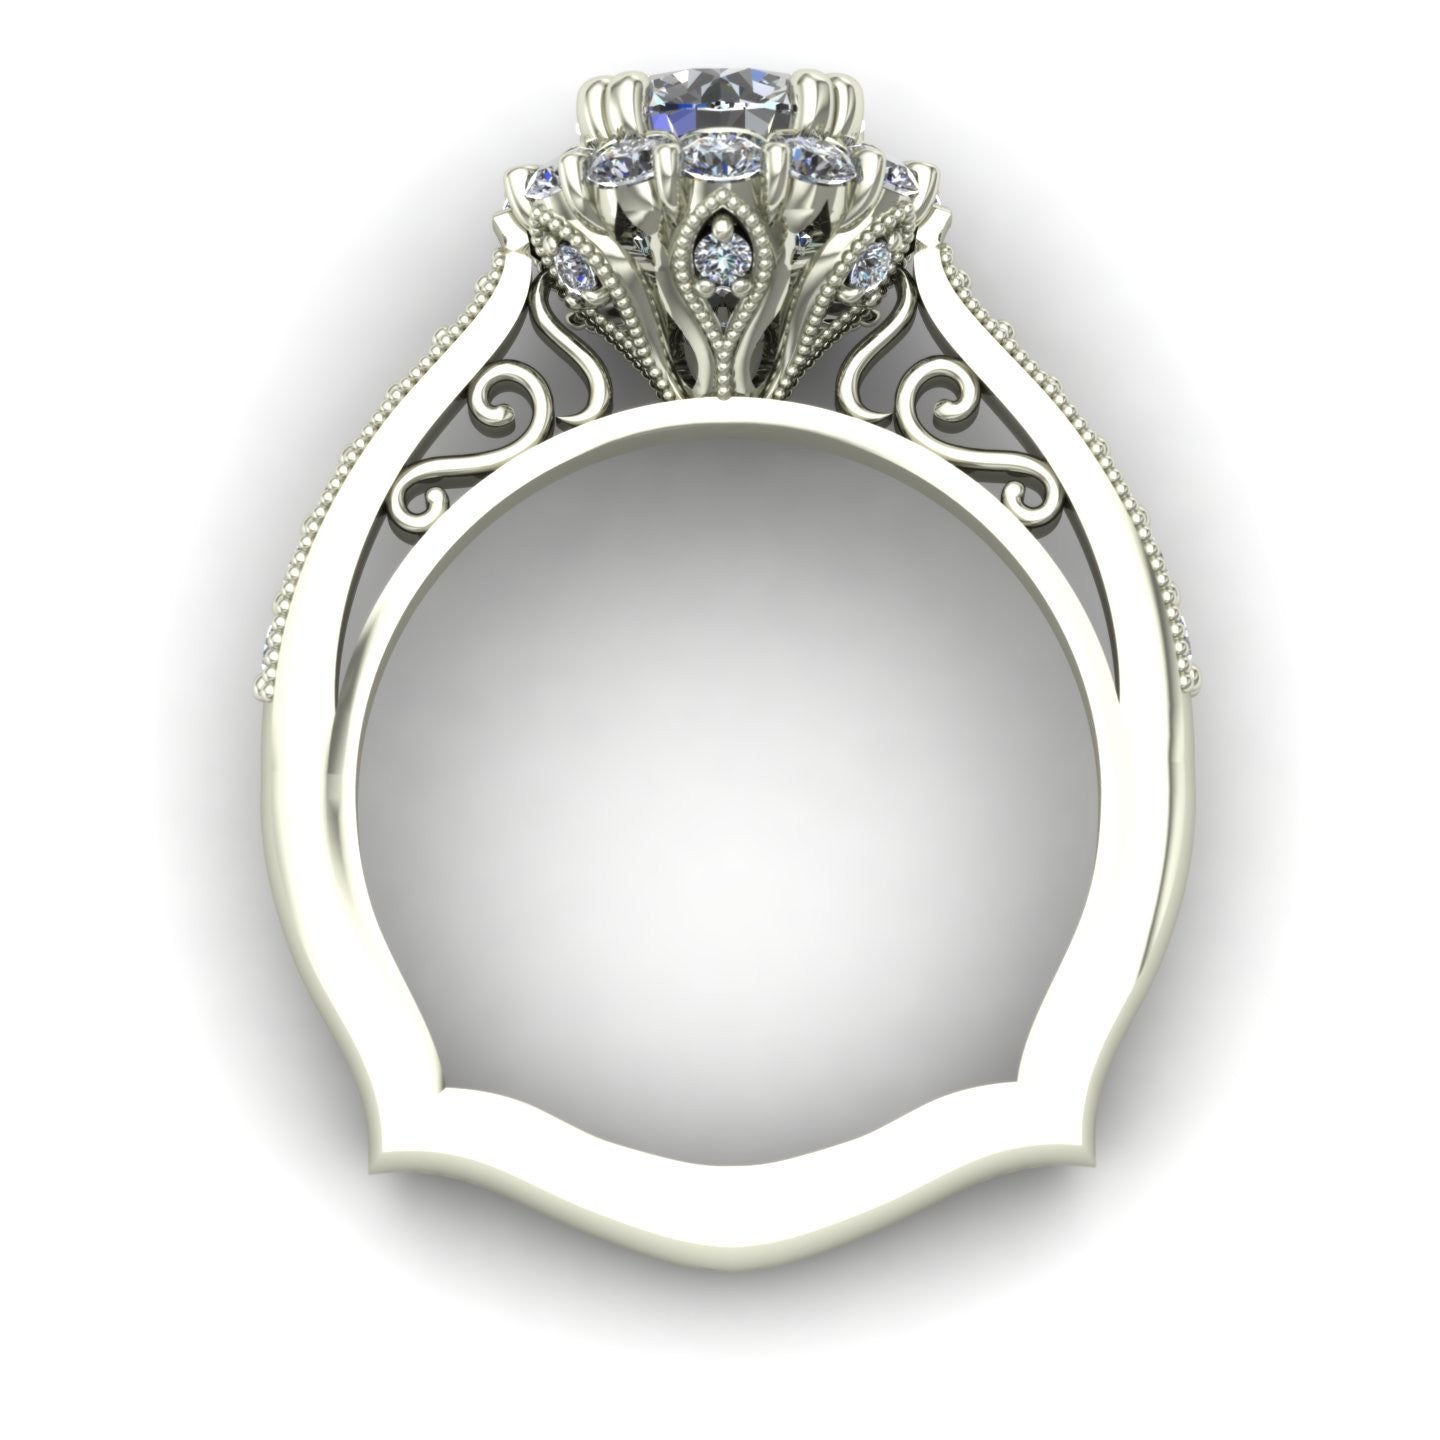 1 ct diamond posey flower halo engagement ring in 14k white gold - Charles Babb Designs - through finger view